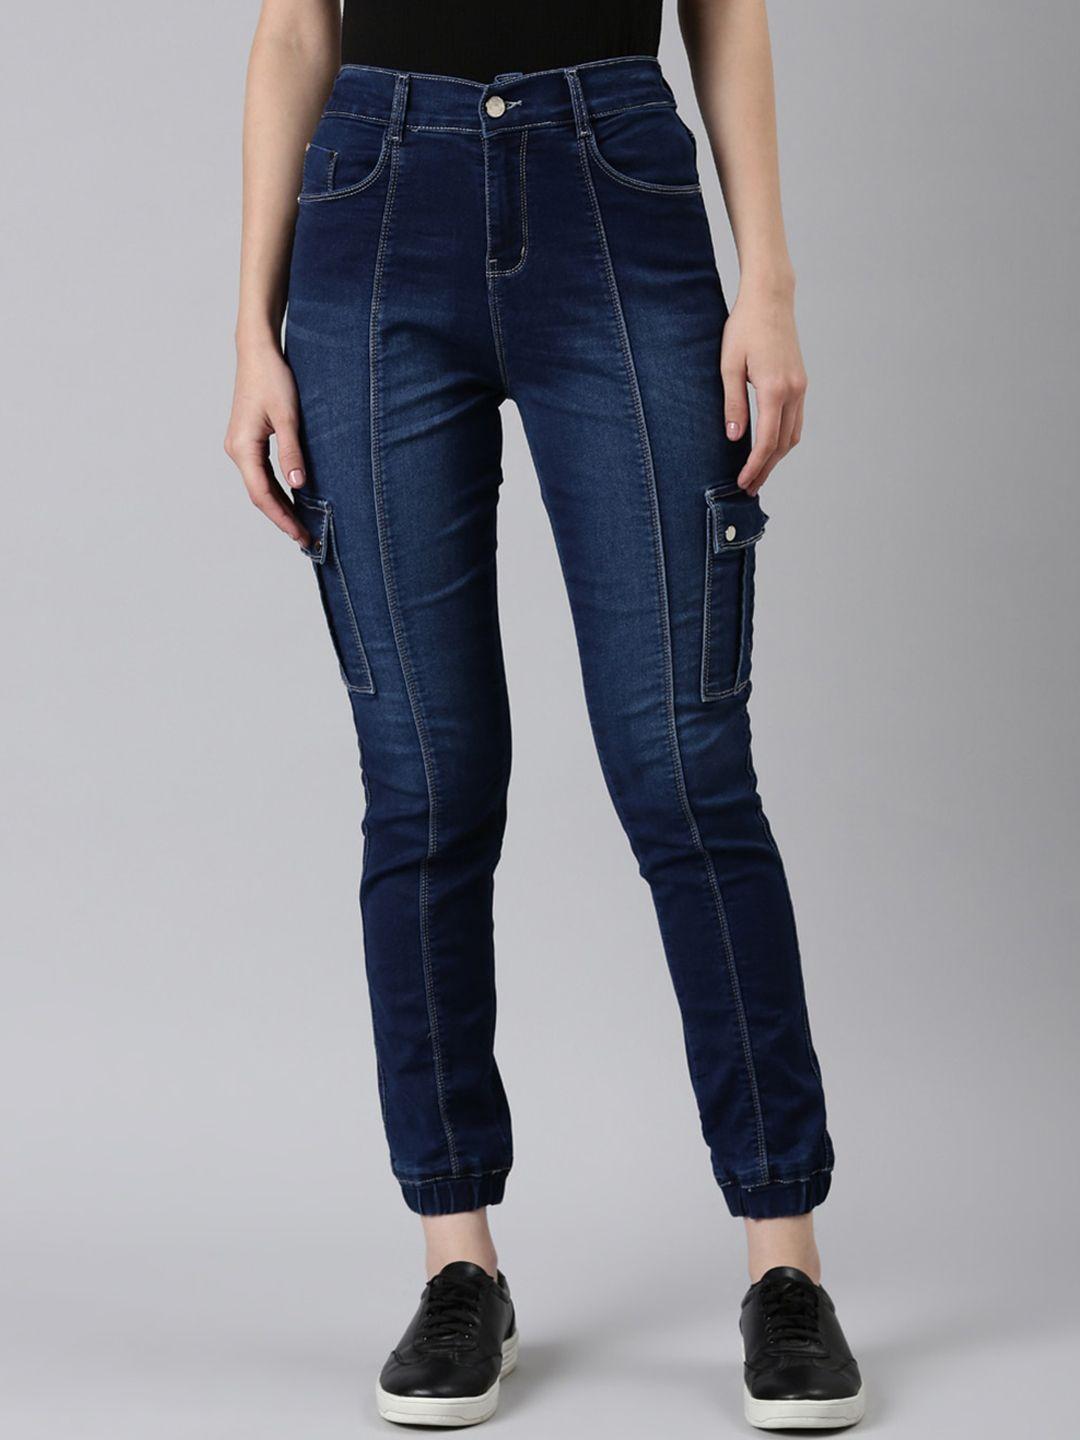 showoff-women-navy-blue-jean-jogger-clean-look-light-fade-acid-wash-stretchable-jeans